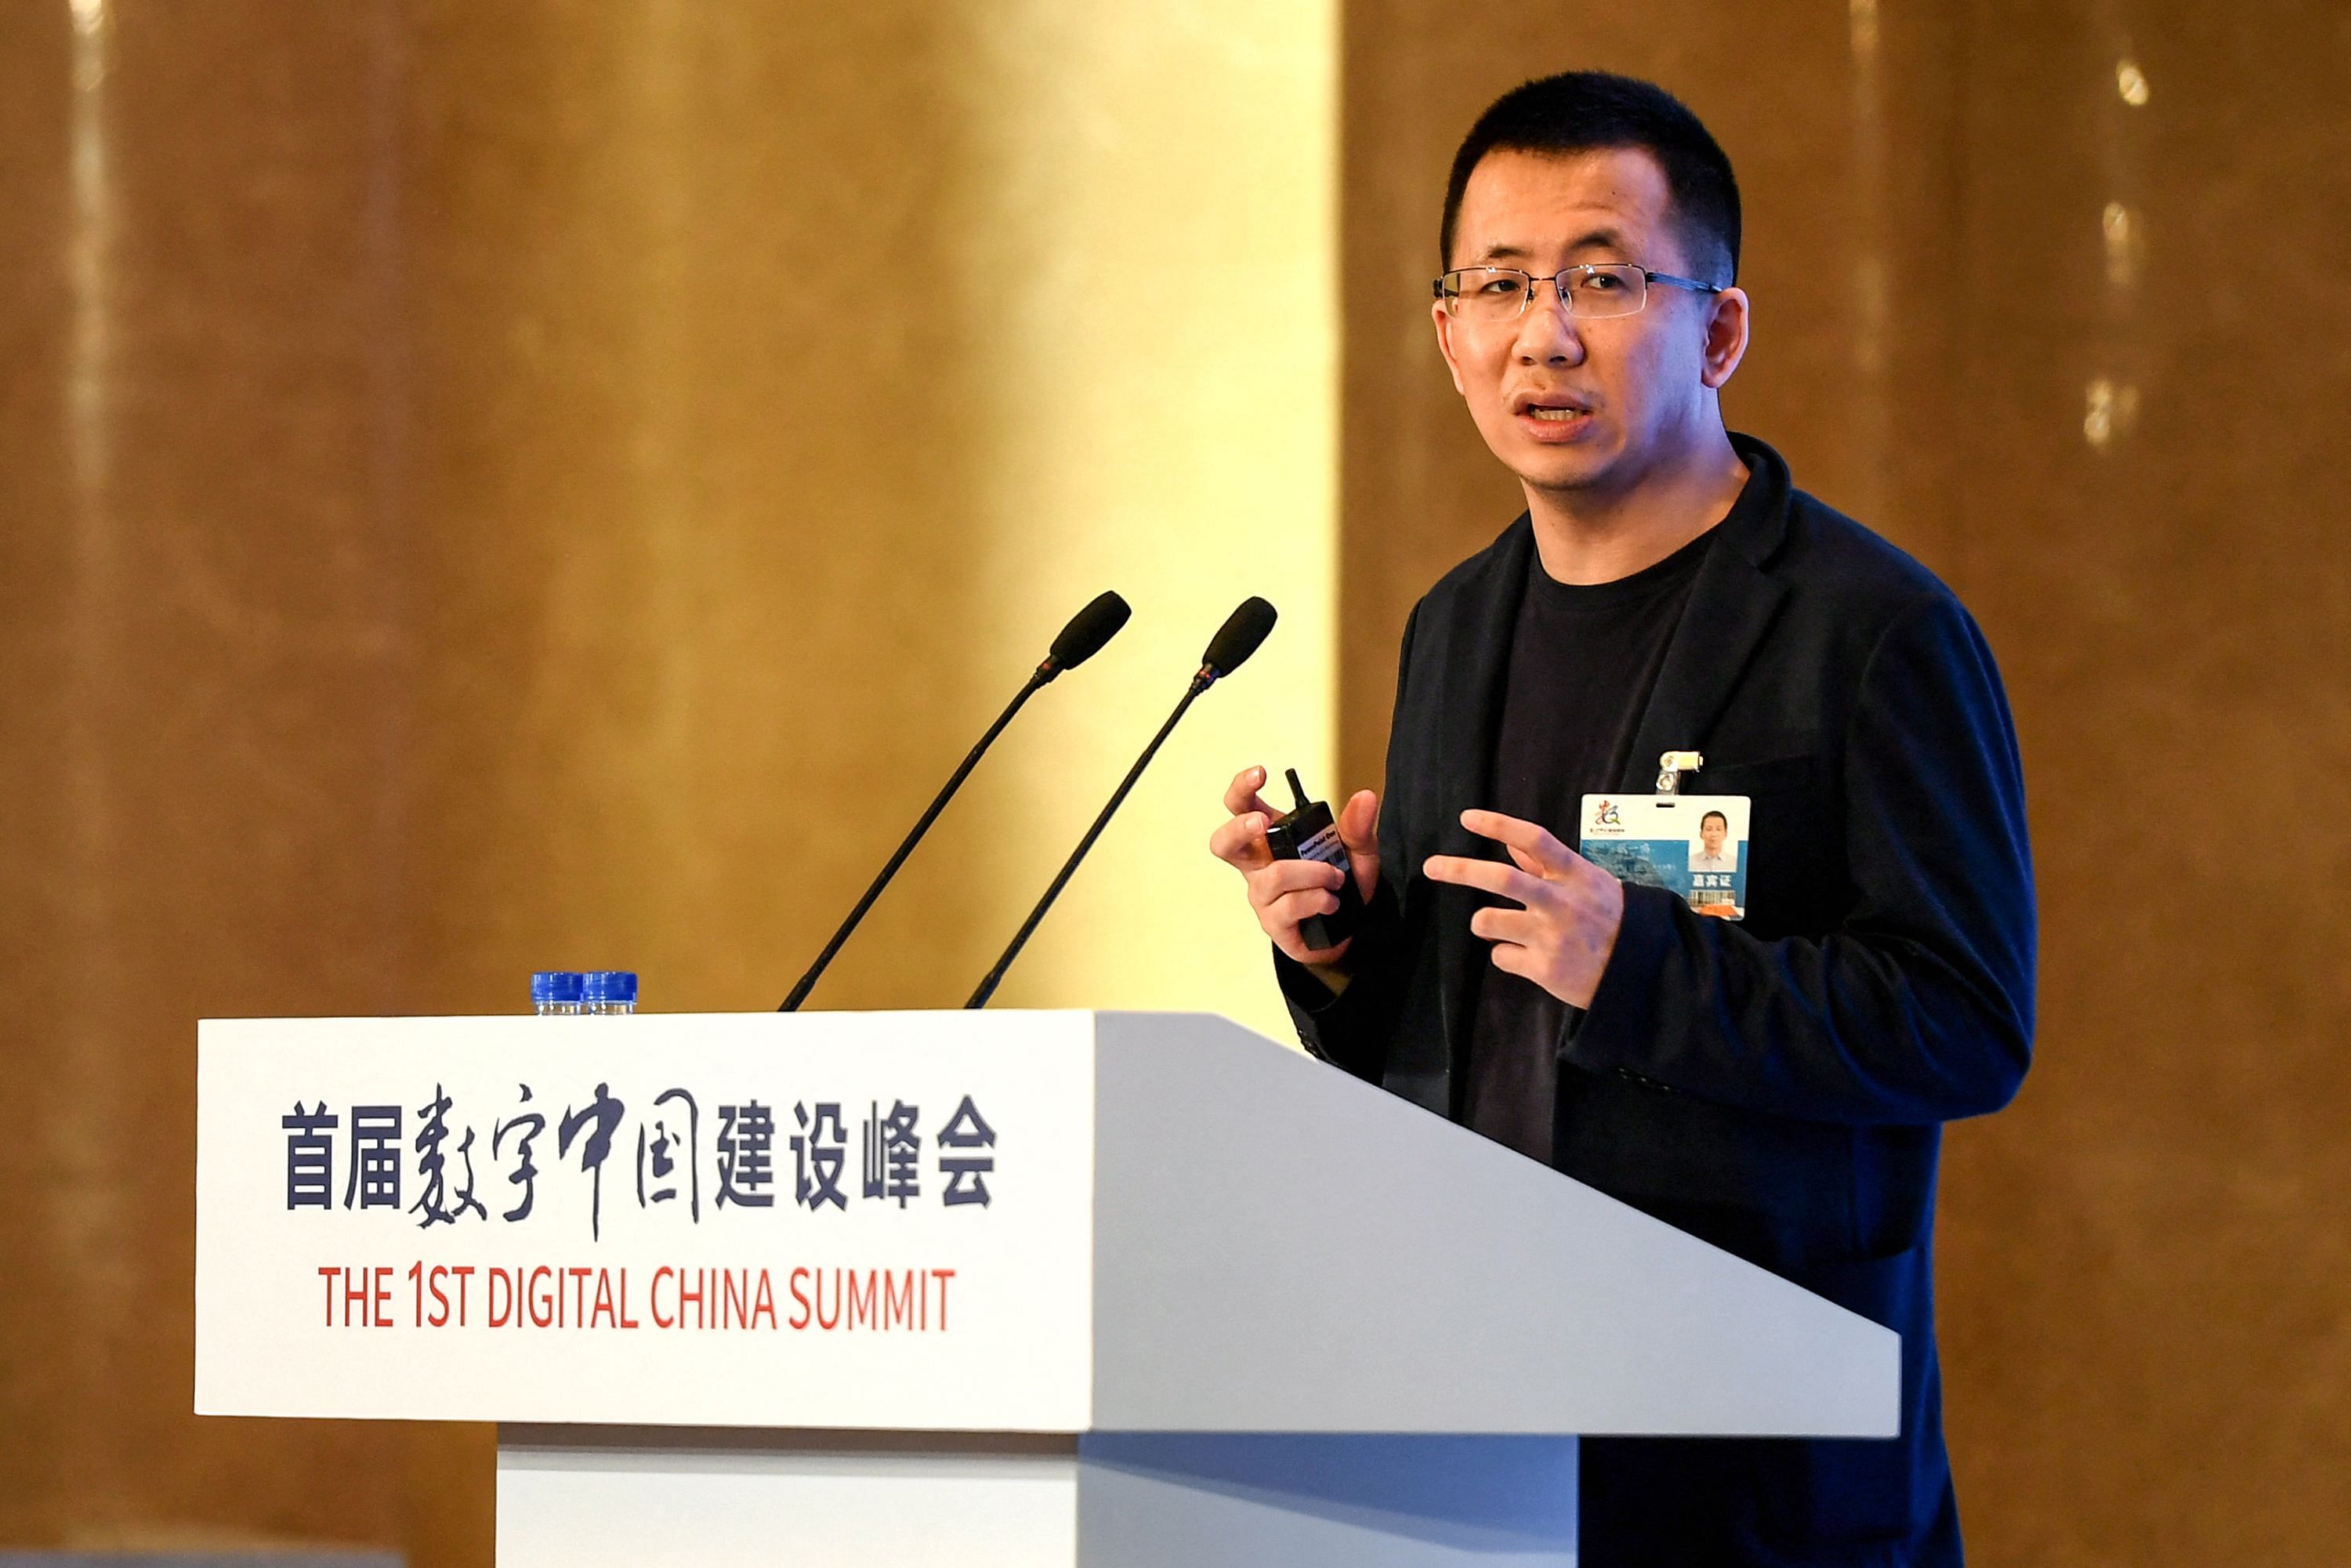 Zhang Yiming, the co-founder of Bytedance. Credit: AFP Photo